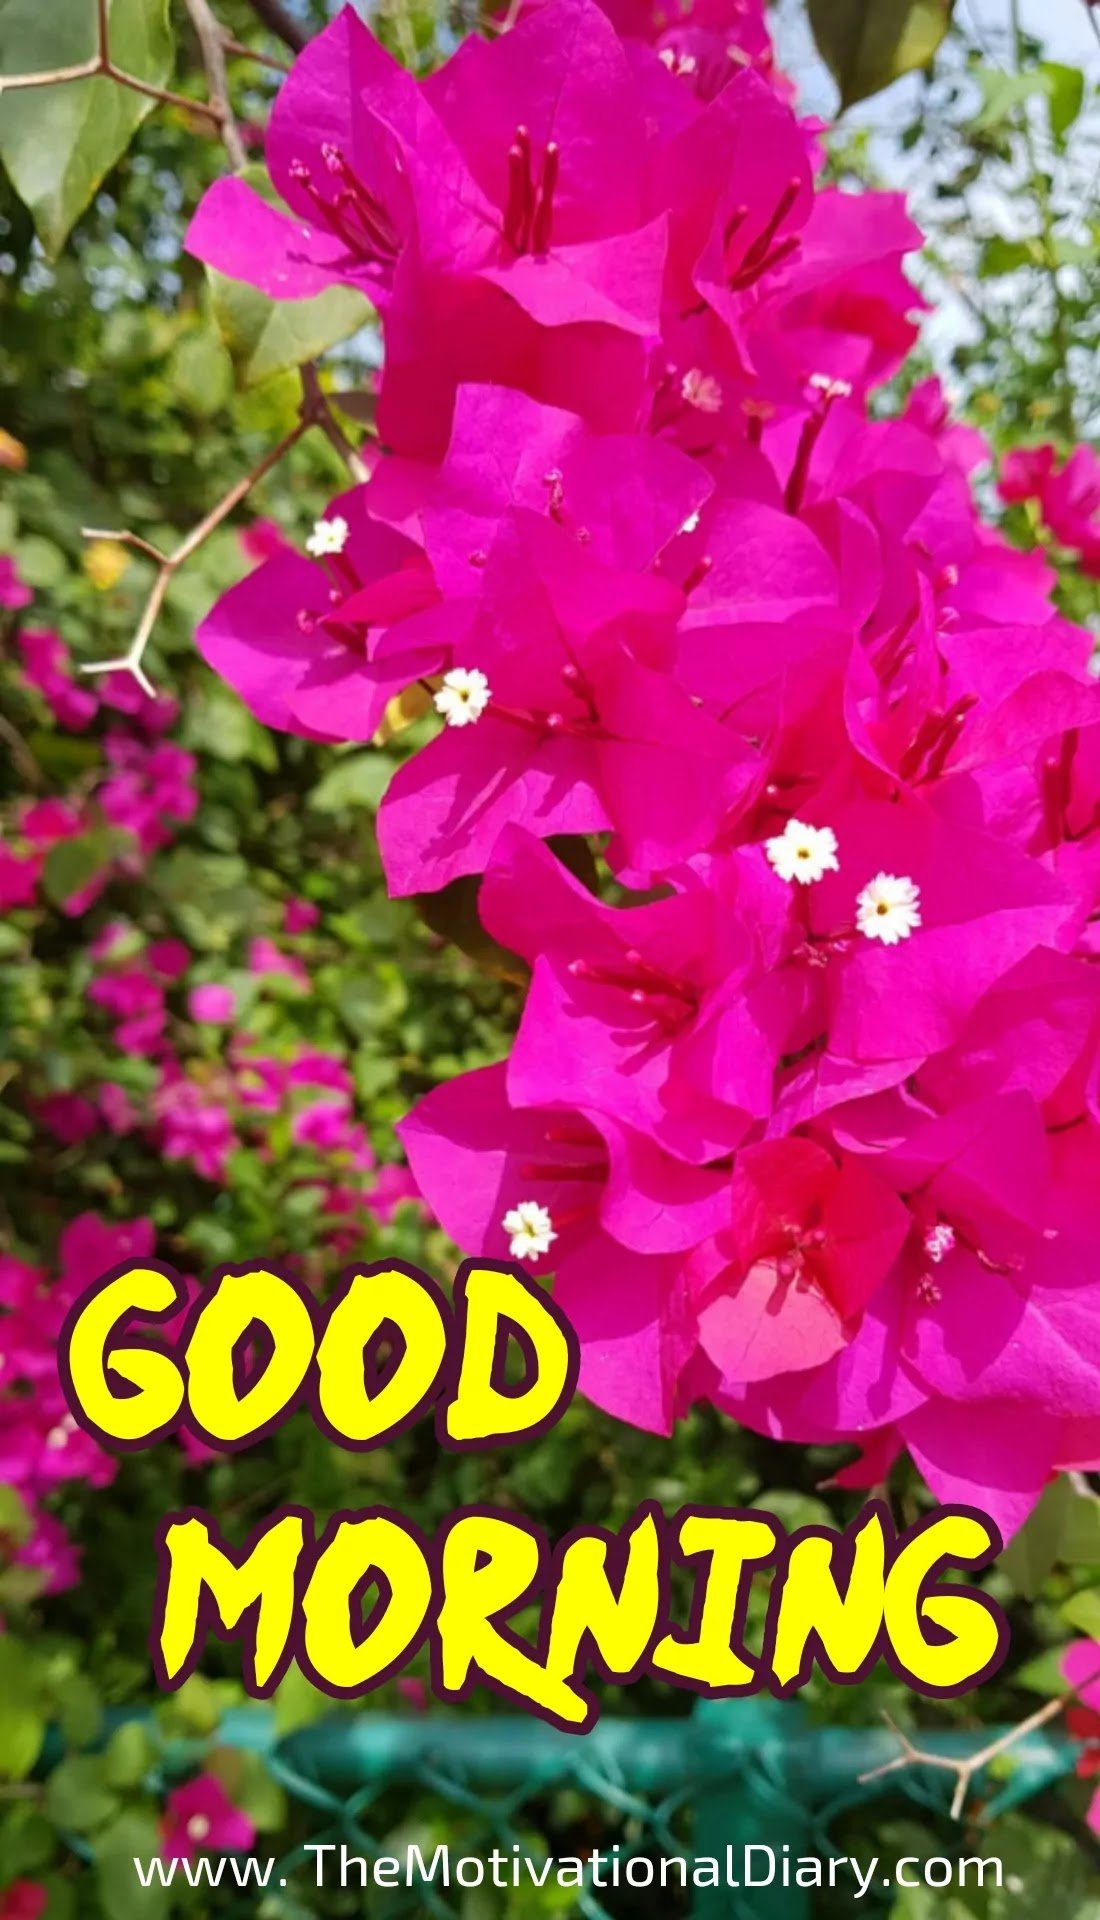 Morning Wishes with Bougainvillea Petals
